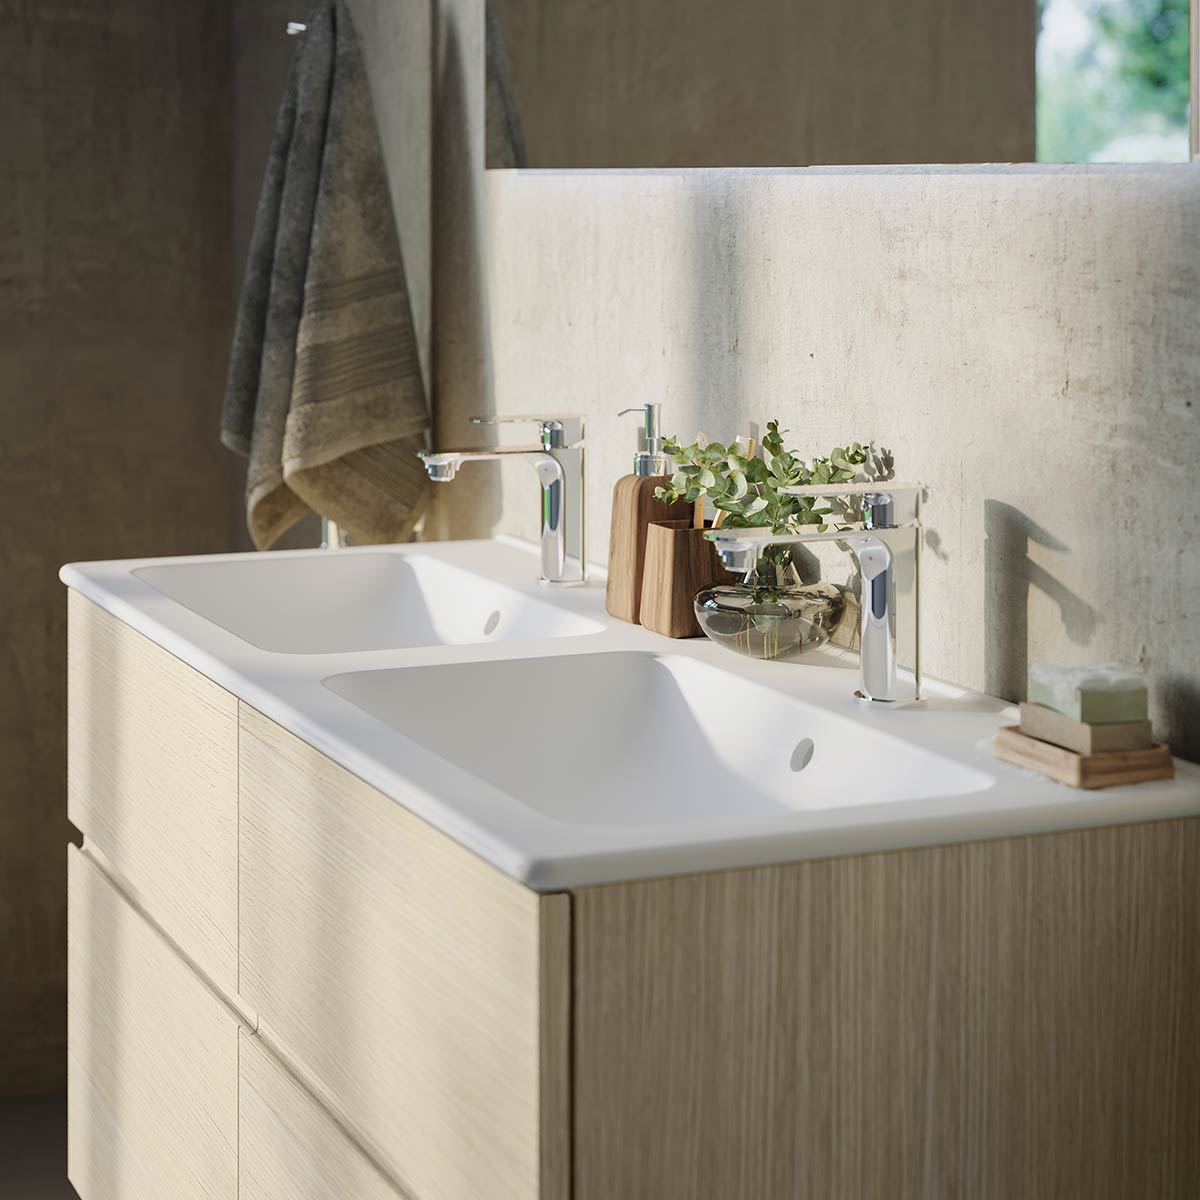 Our washbasins are both the crowning glory of our bathrooms and a combination of design and functionality in beautiful harmony.